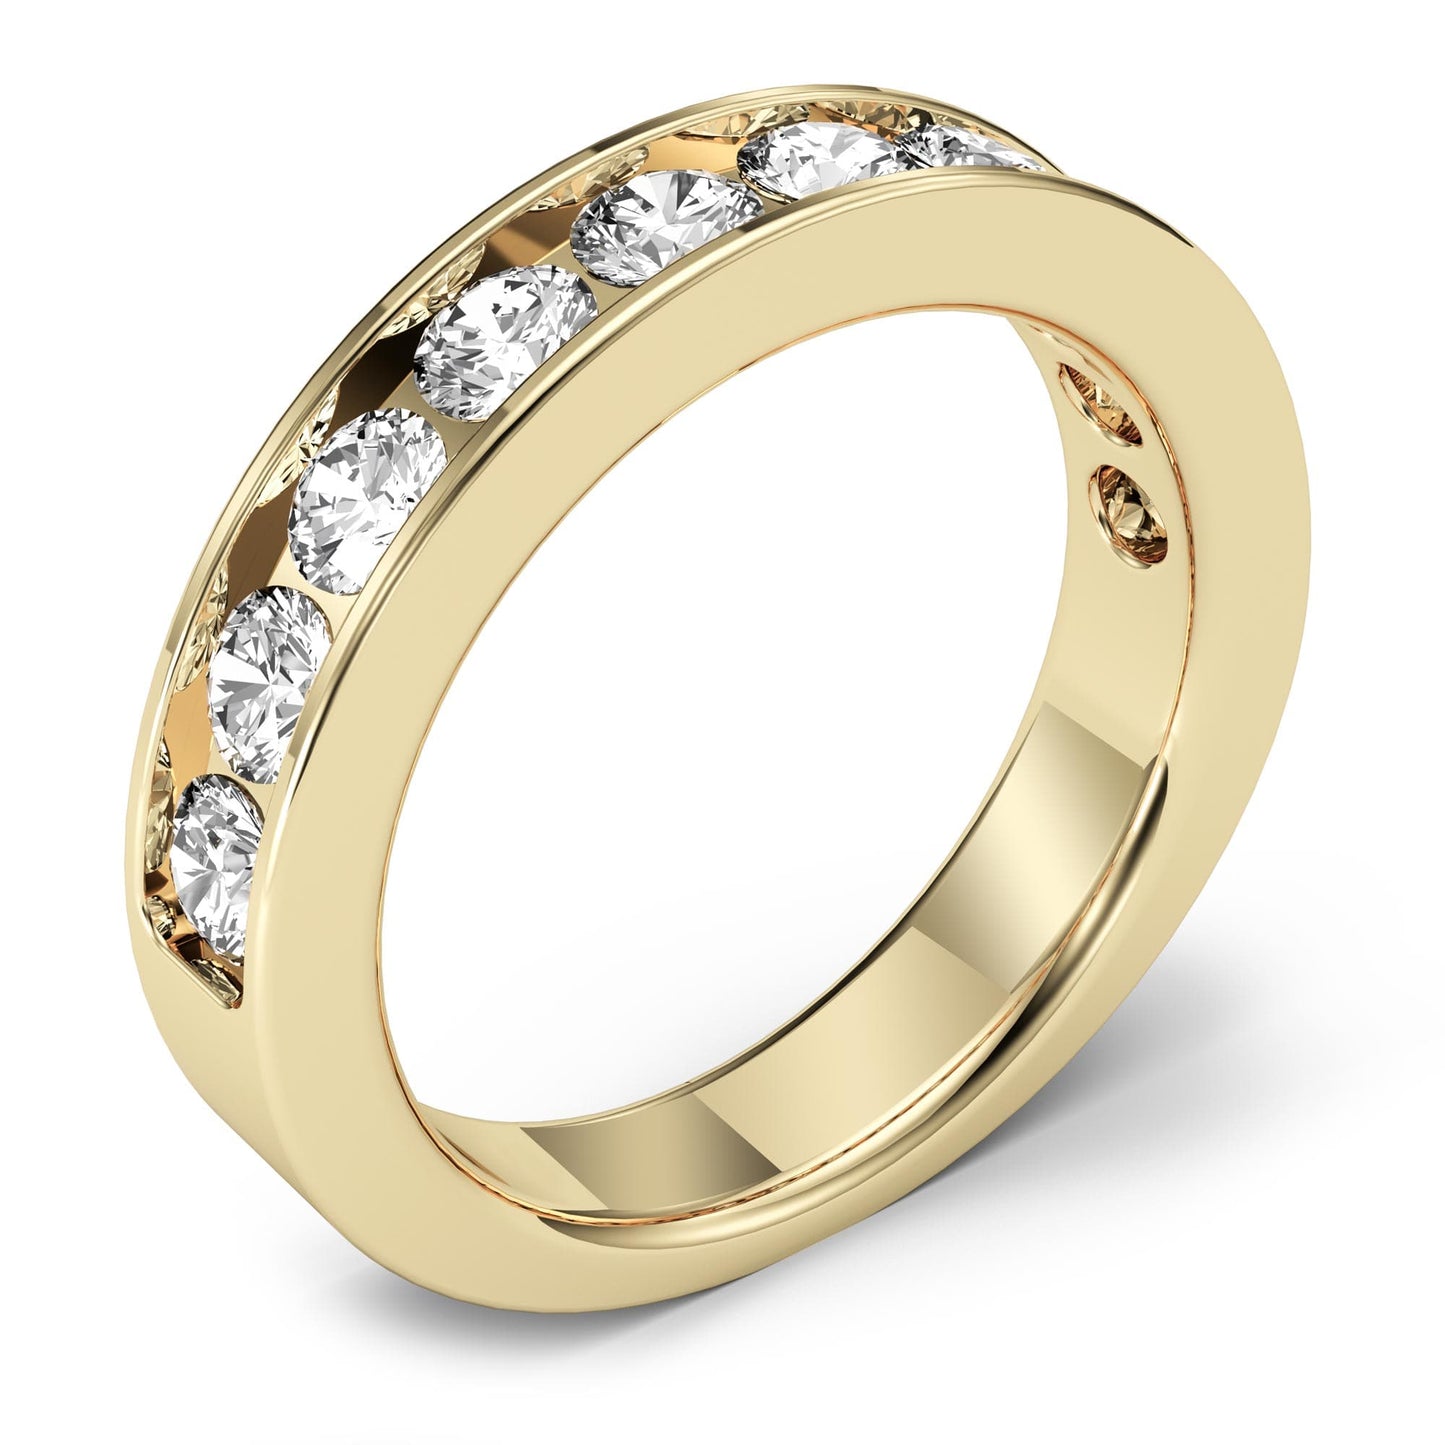 1.5ct Channel Set Round Cut Diamond Ring in 14k Gold